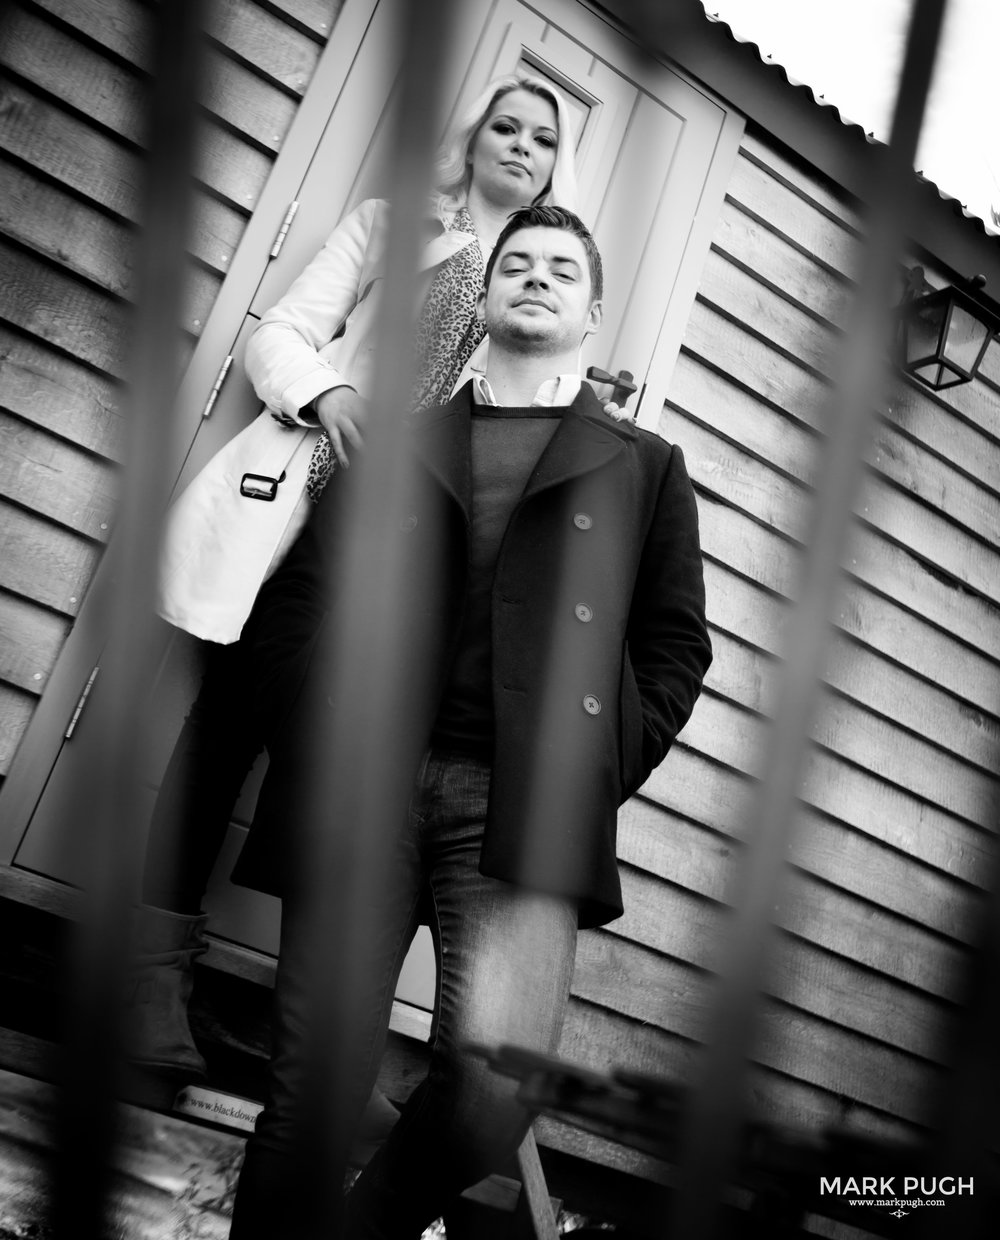 015 - Sam and Richard - fineART preWED at the Carriage Hall Station Road Plumtree Nottingham NG12 5NA by www.markpugh.com Mark Pugh of www.mpmedia.co.uk_.JPG